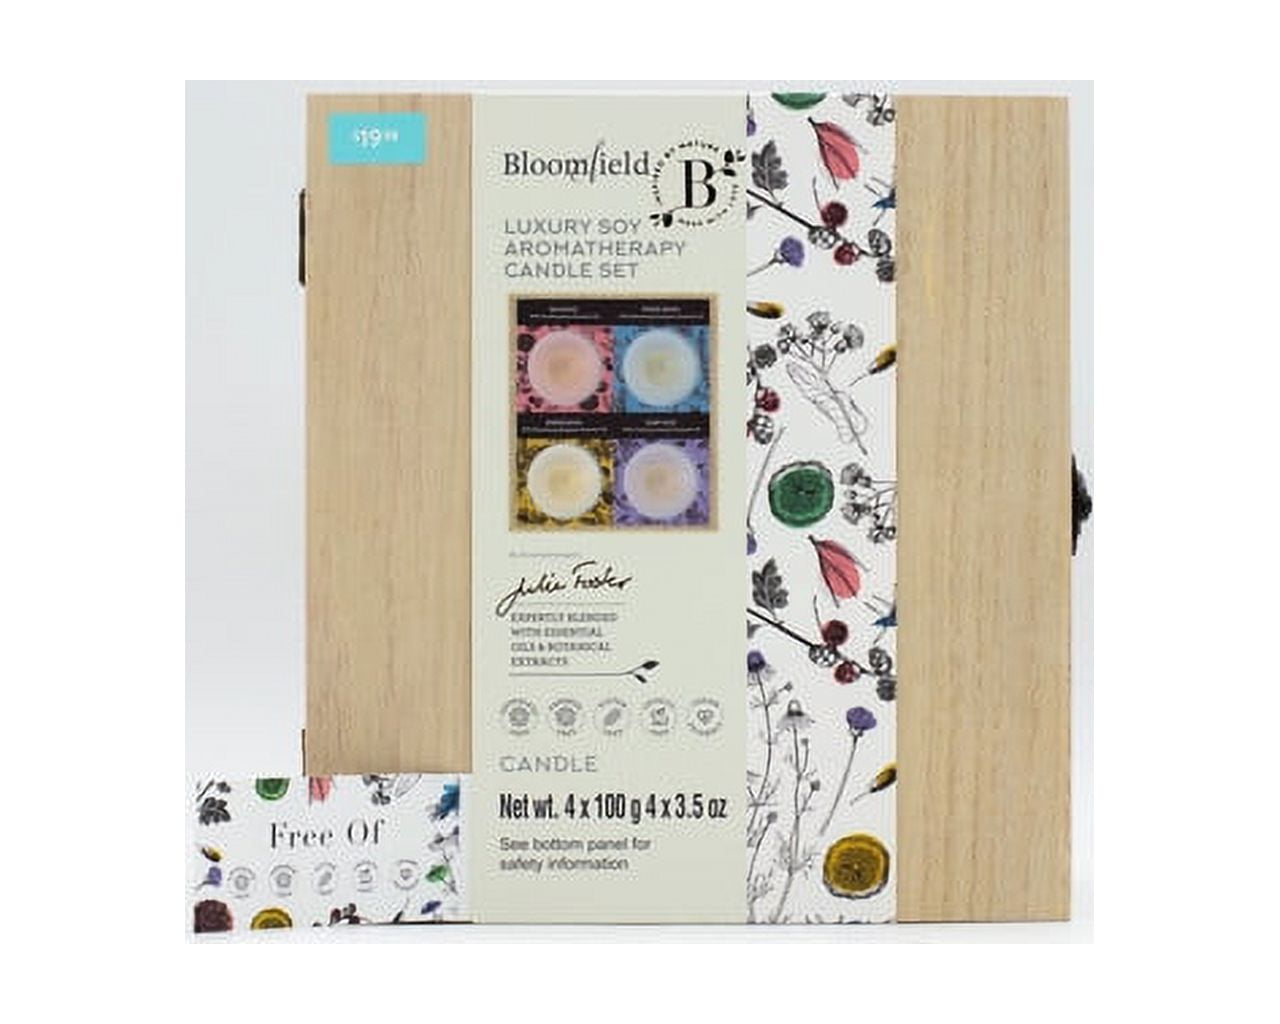 4-Piece Bloomfield Luxury Soy Aromatherapy Candle Set $6.38 + Free S&H w/ Walmart+ or $35+